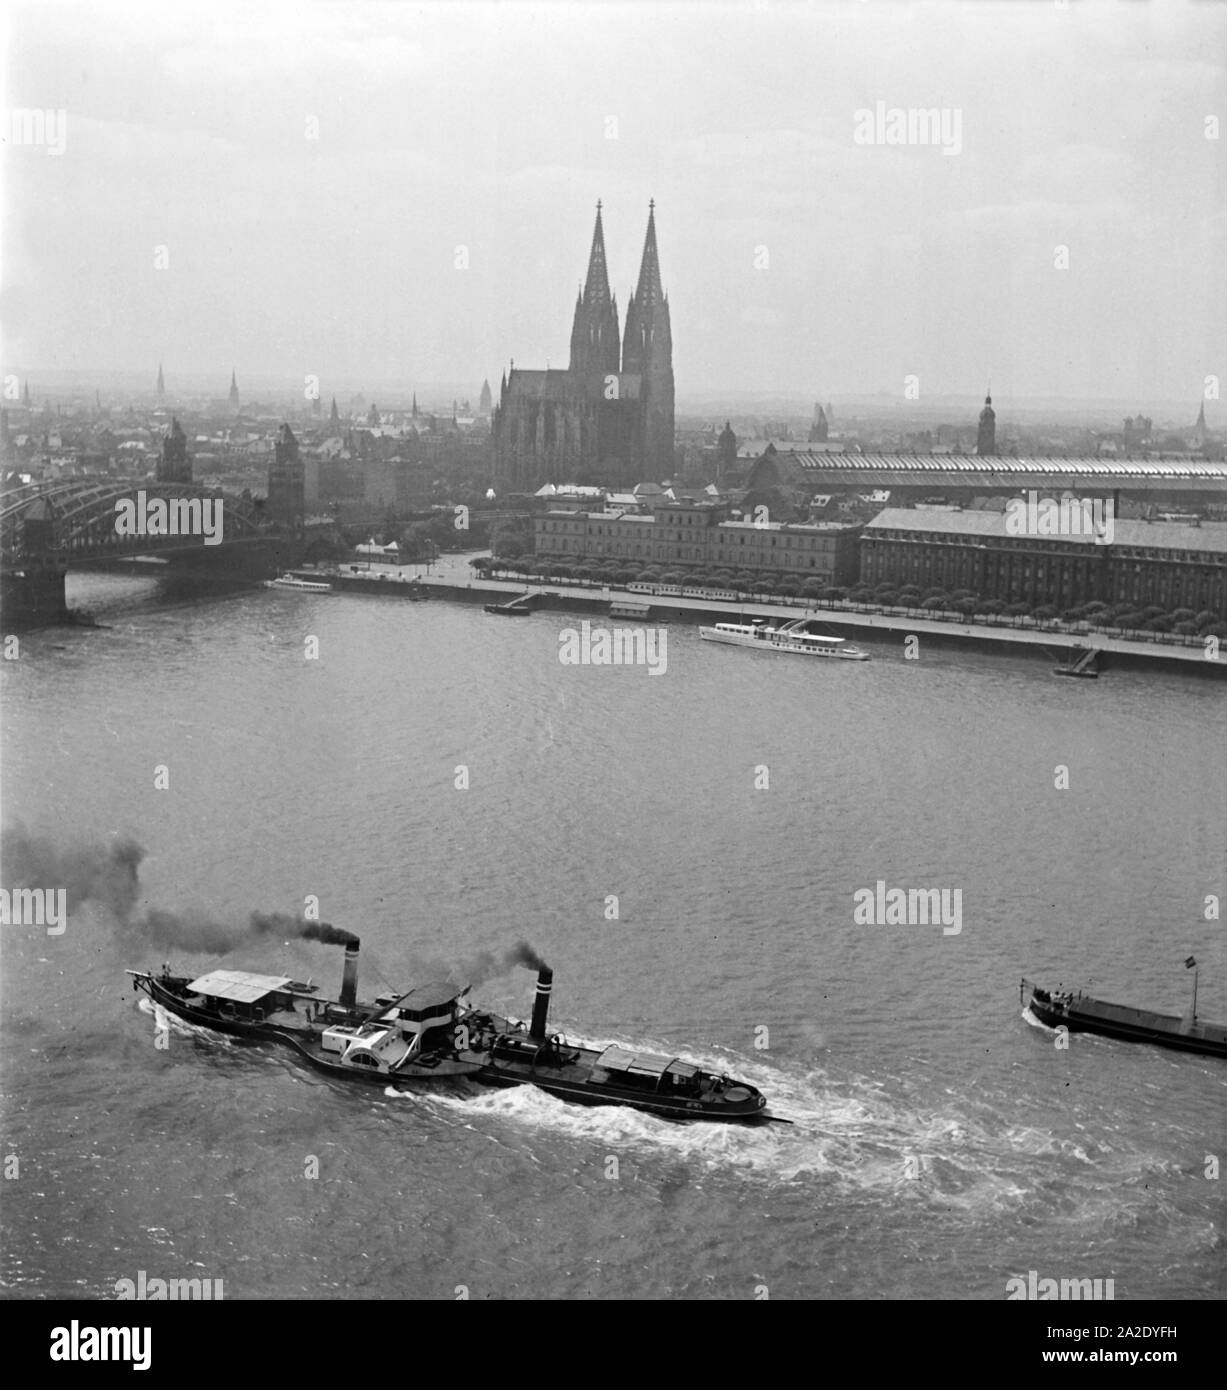 Blick vom Messeturm auf die Stadtseite von Köln mit Dom und Hauptbahnhof, 1930er Jahre. View from the fair tower over the city of Cologne with its cathedral and main station, 1930s. Stock Photo